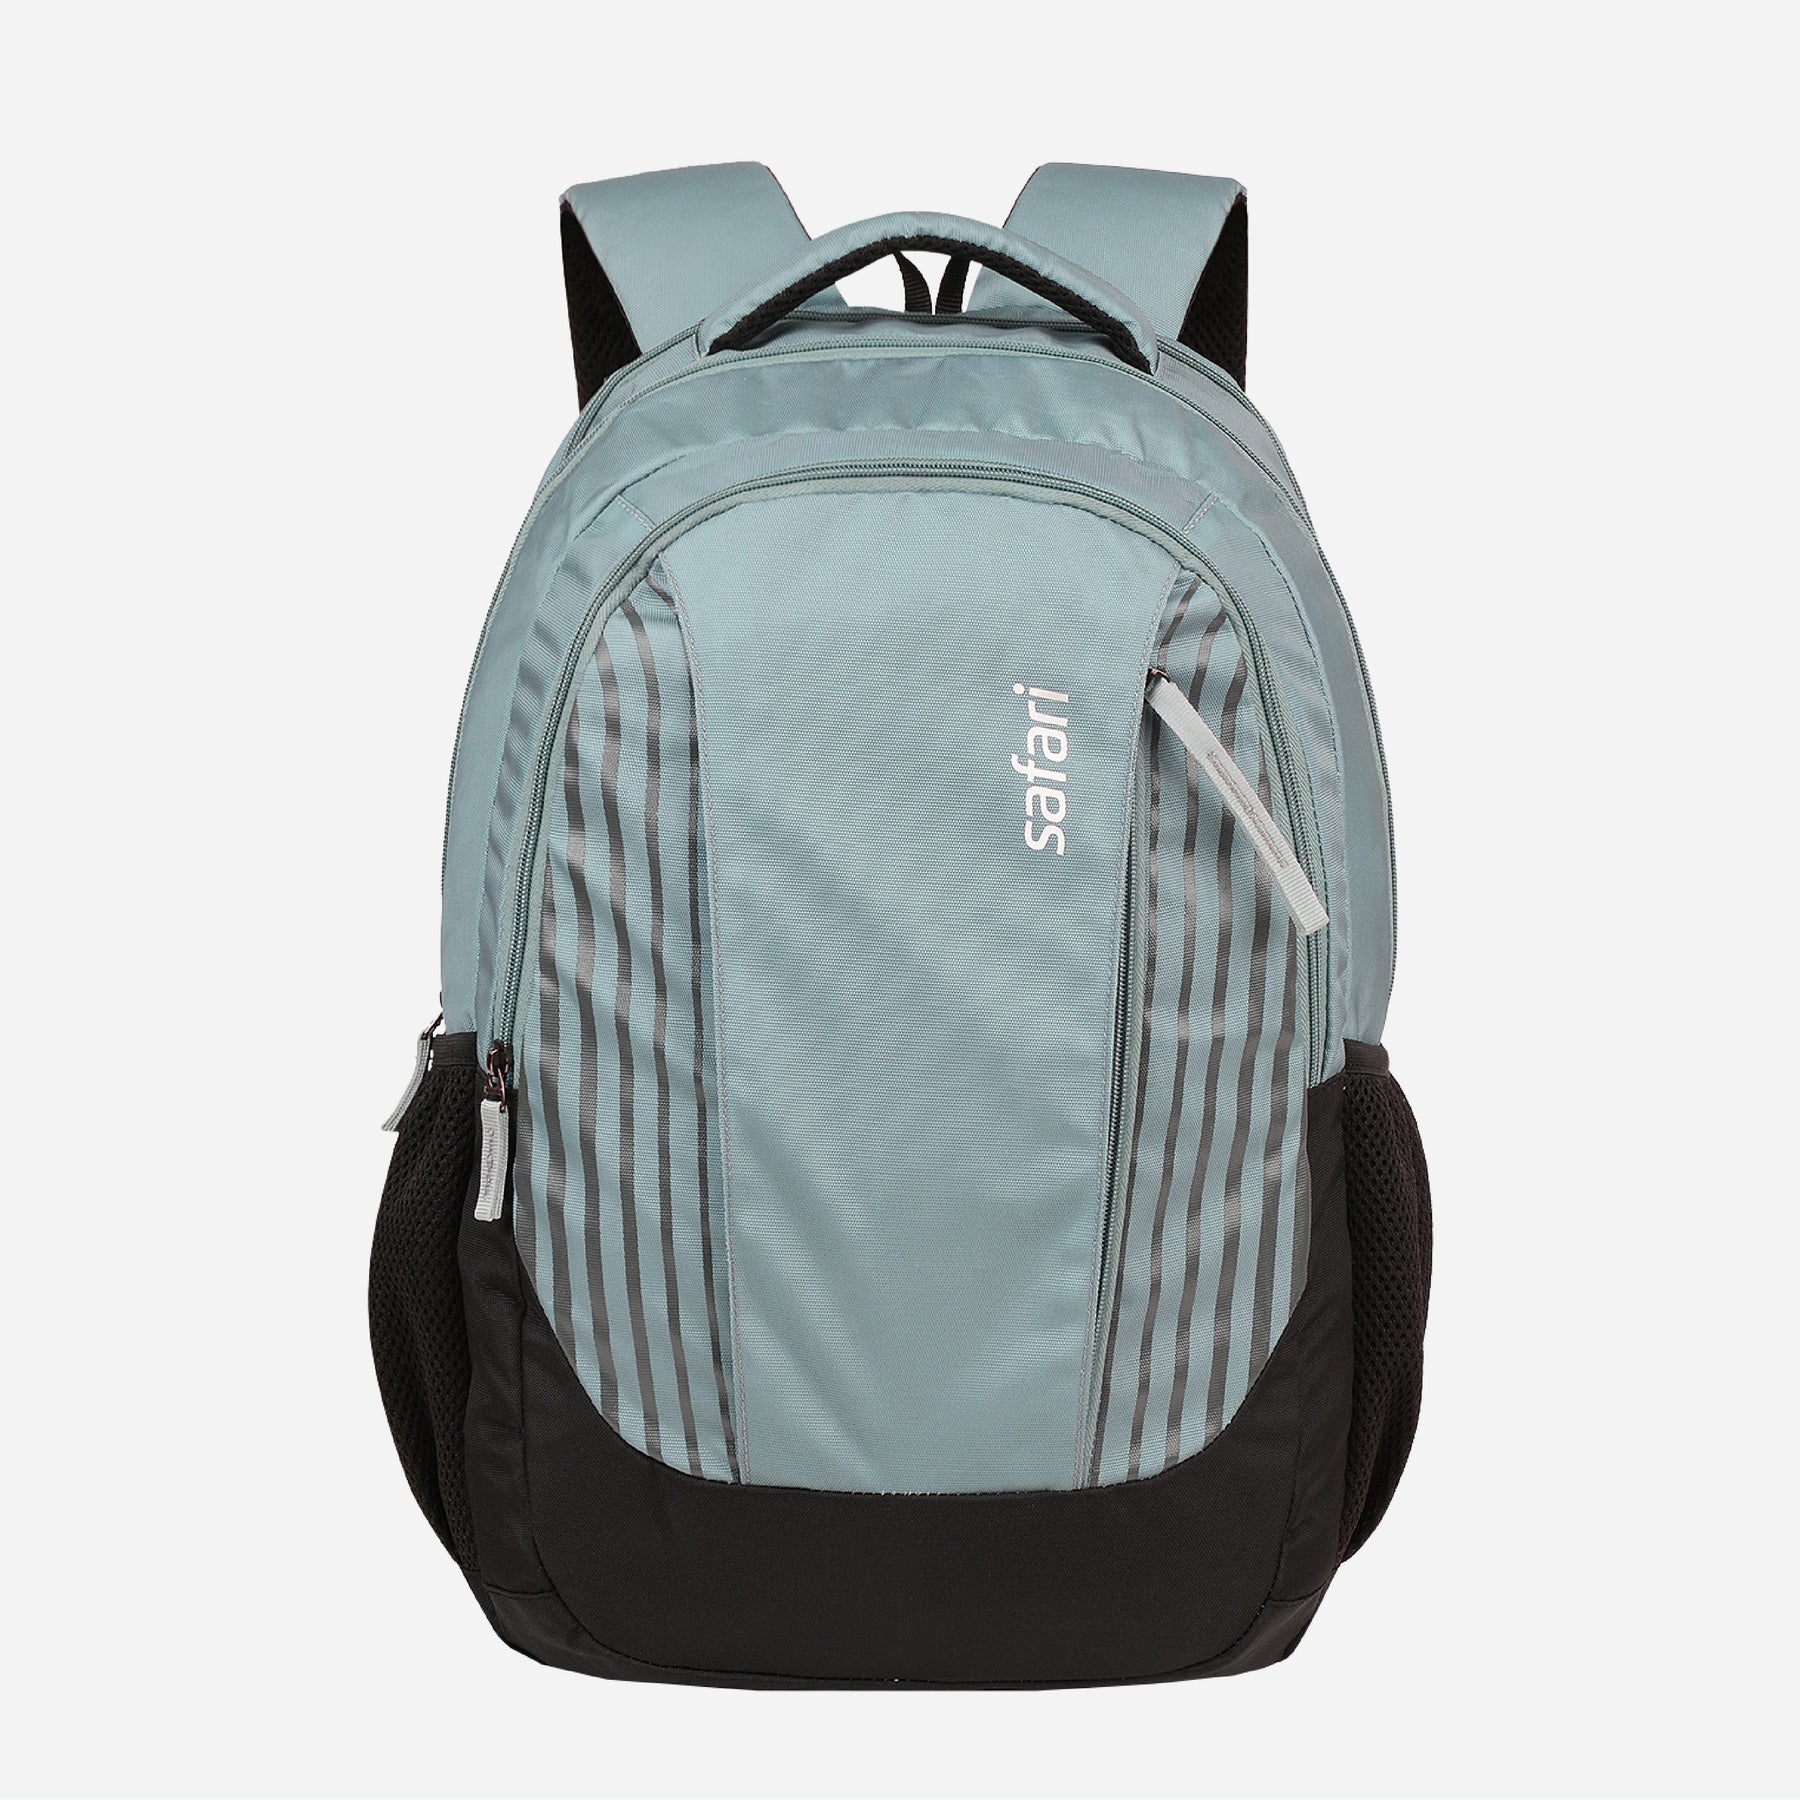 Safari Tint 30L Grey Laptop Backpack with Easy Access Pockets